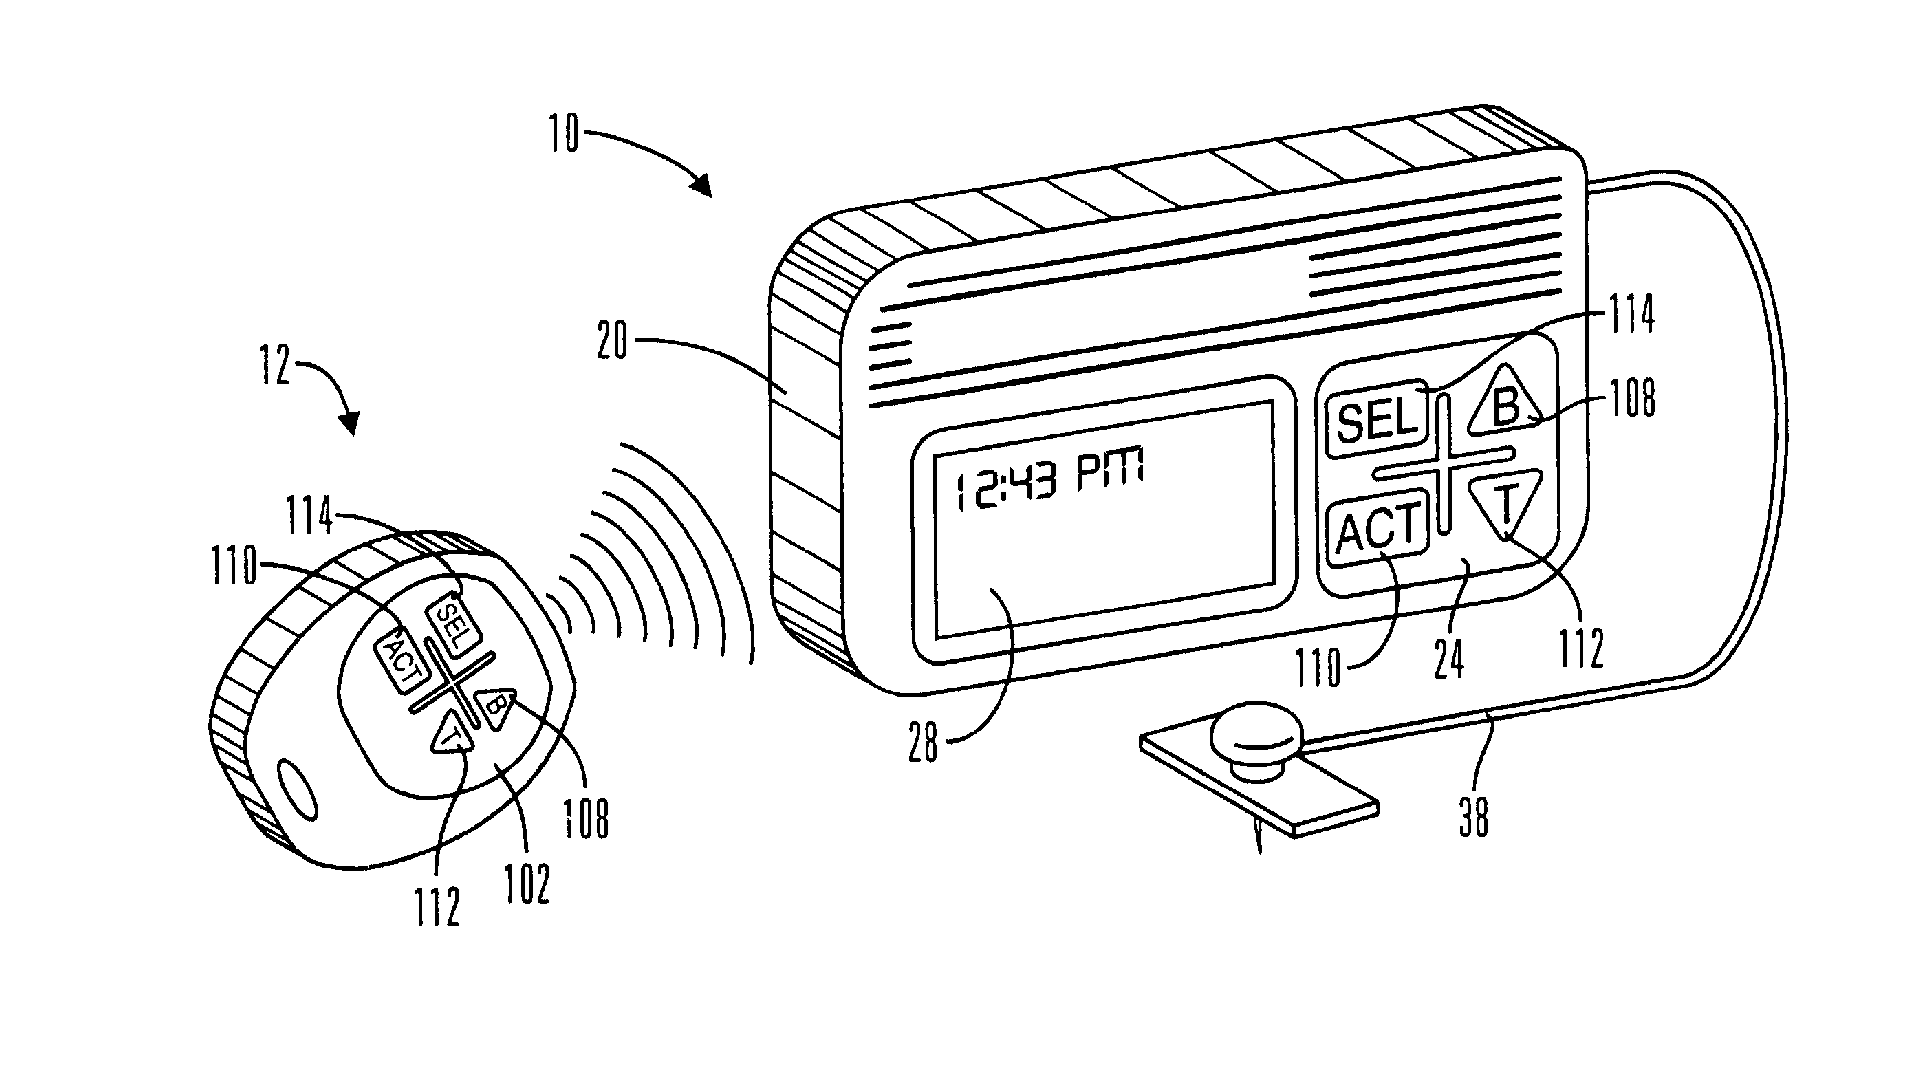 Method and System for Programming an Infusion Device